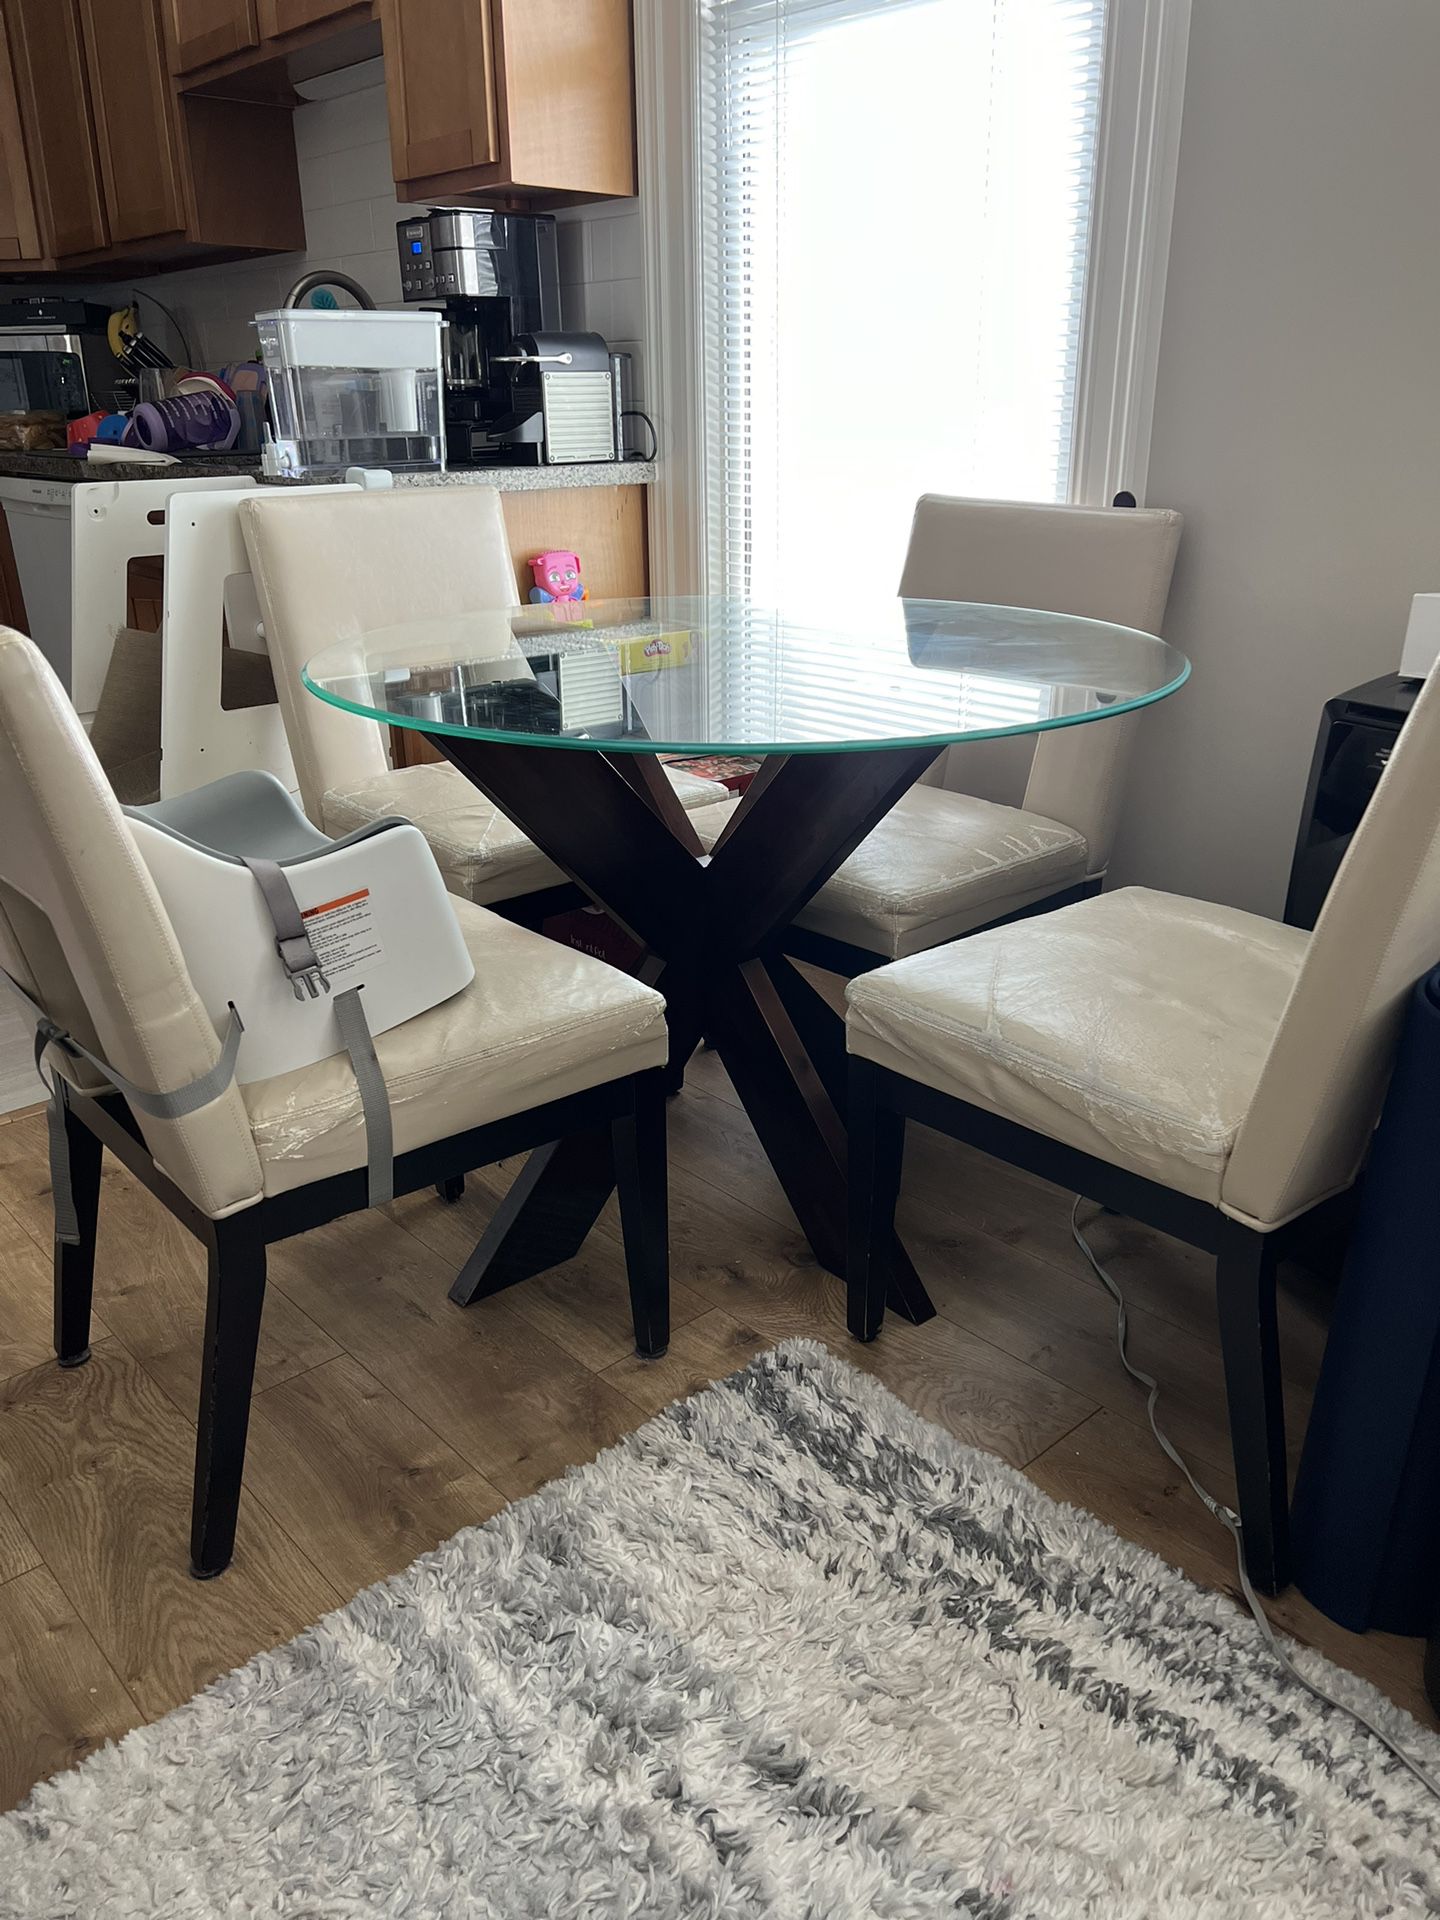 42’ Round glass Dining Room Table with chairs 